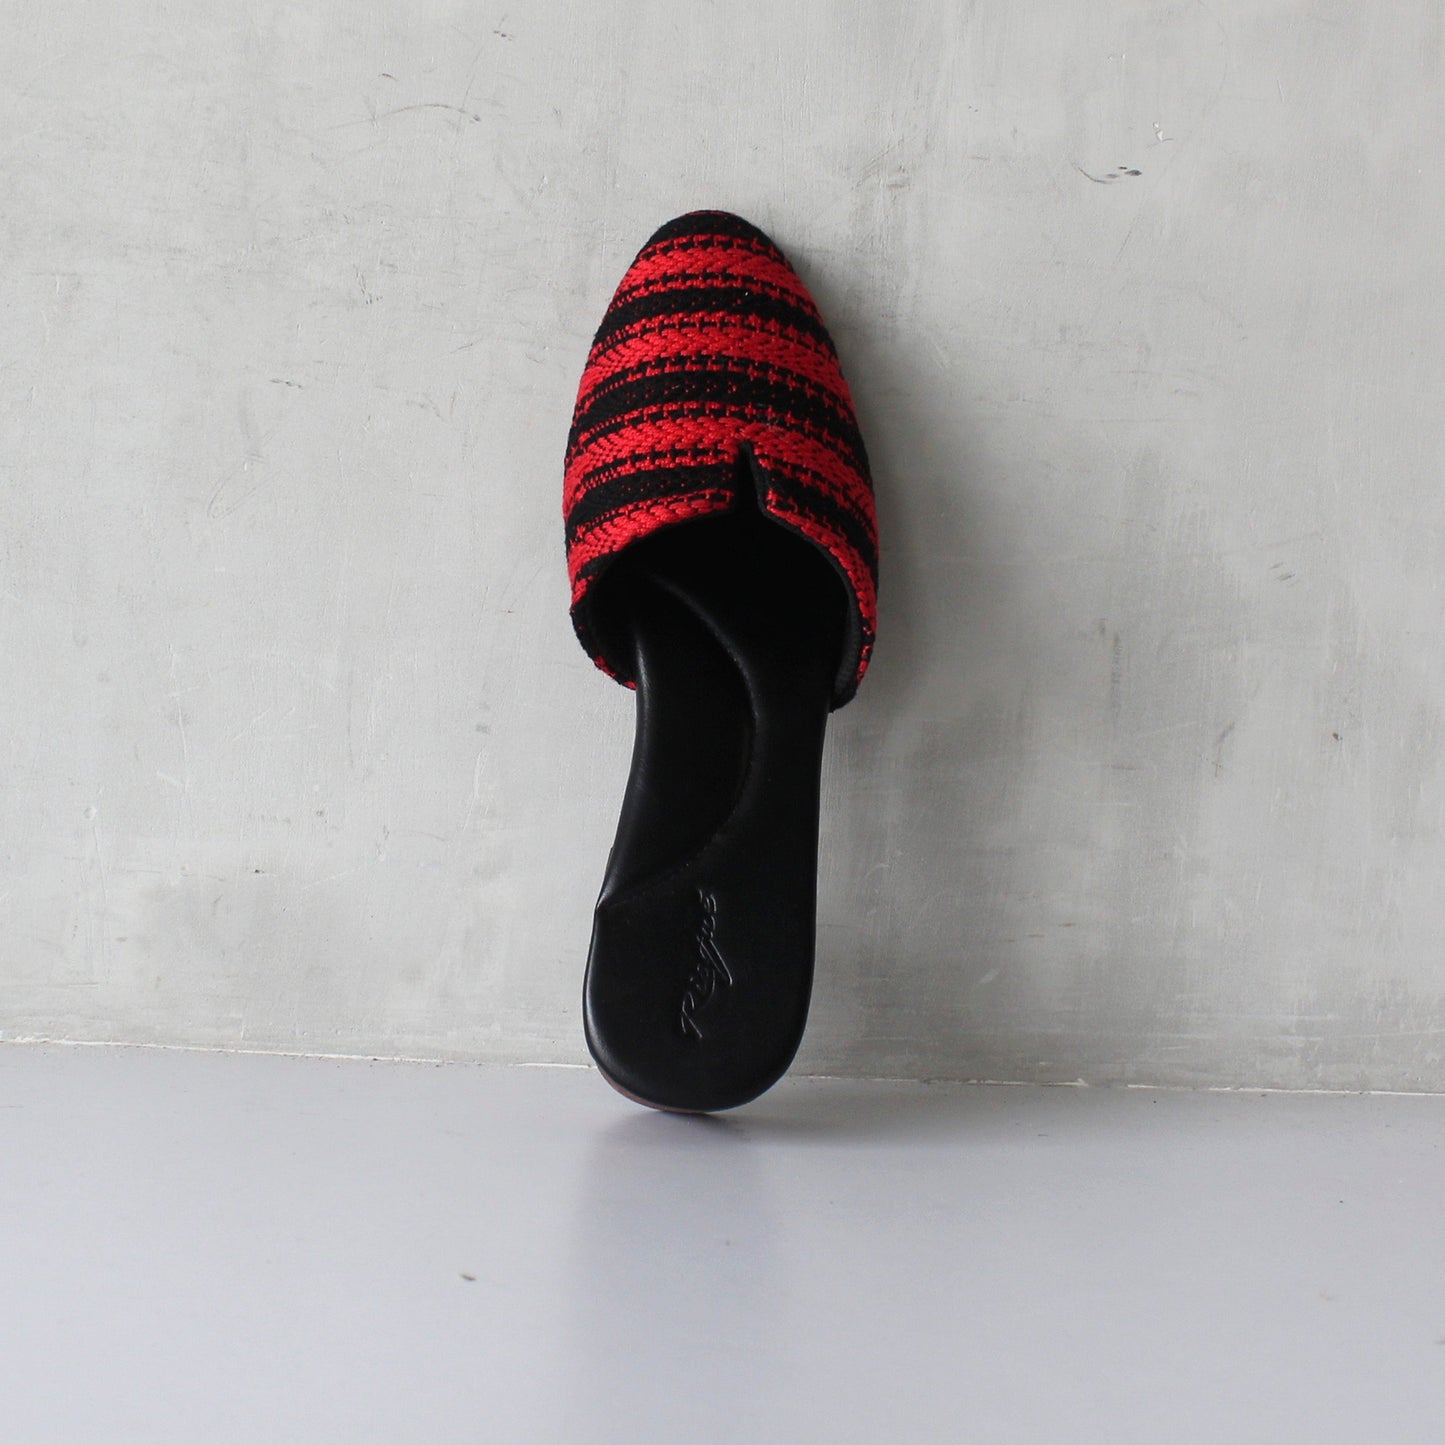 Lola Mules (Red) - Sizes 7, 8